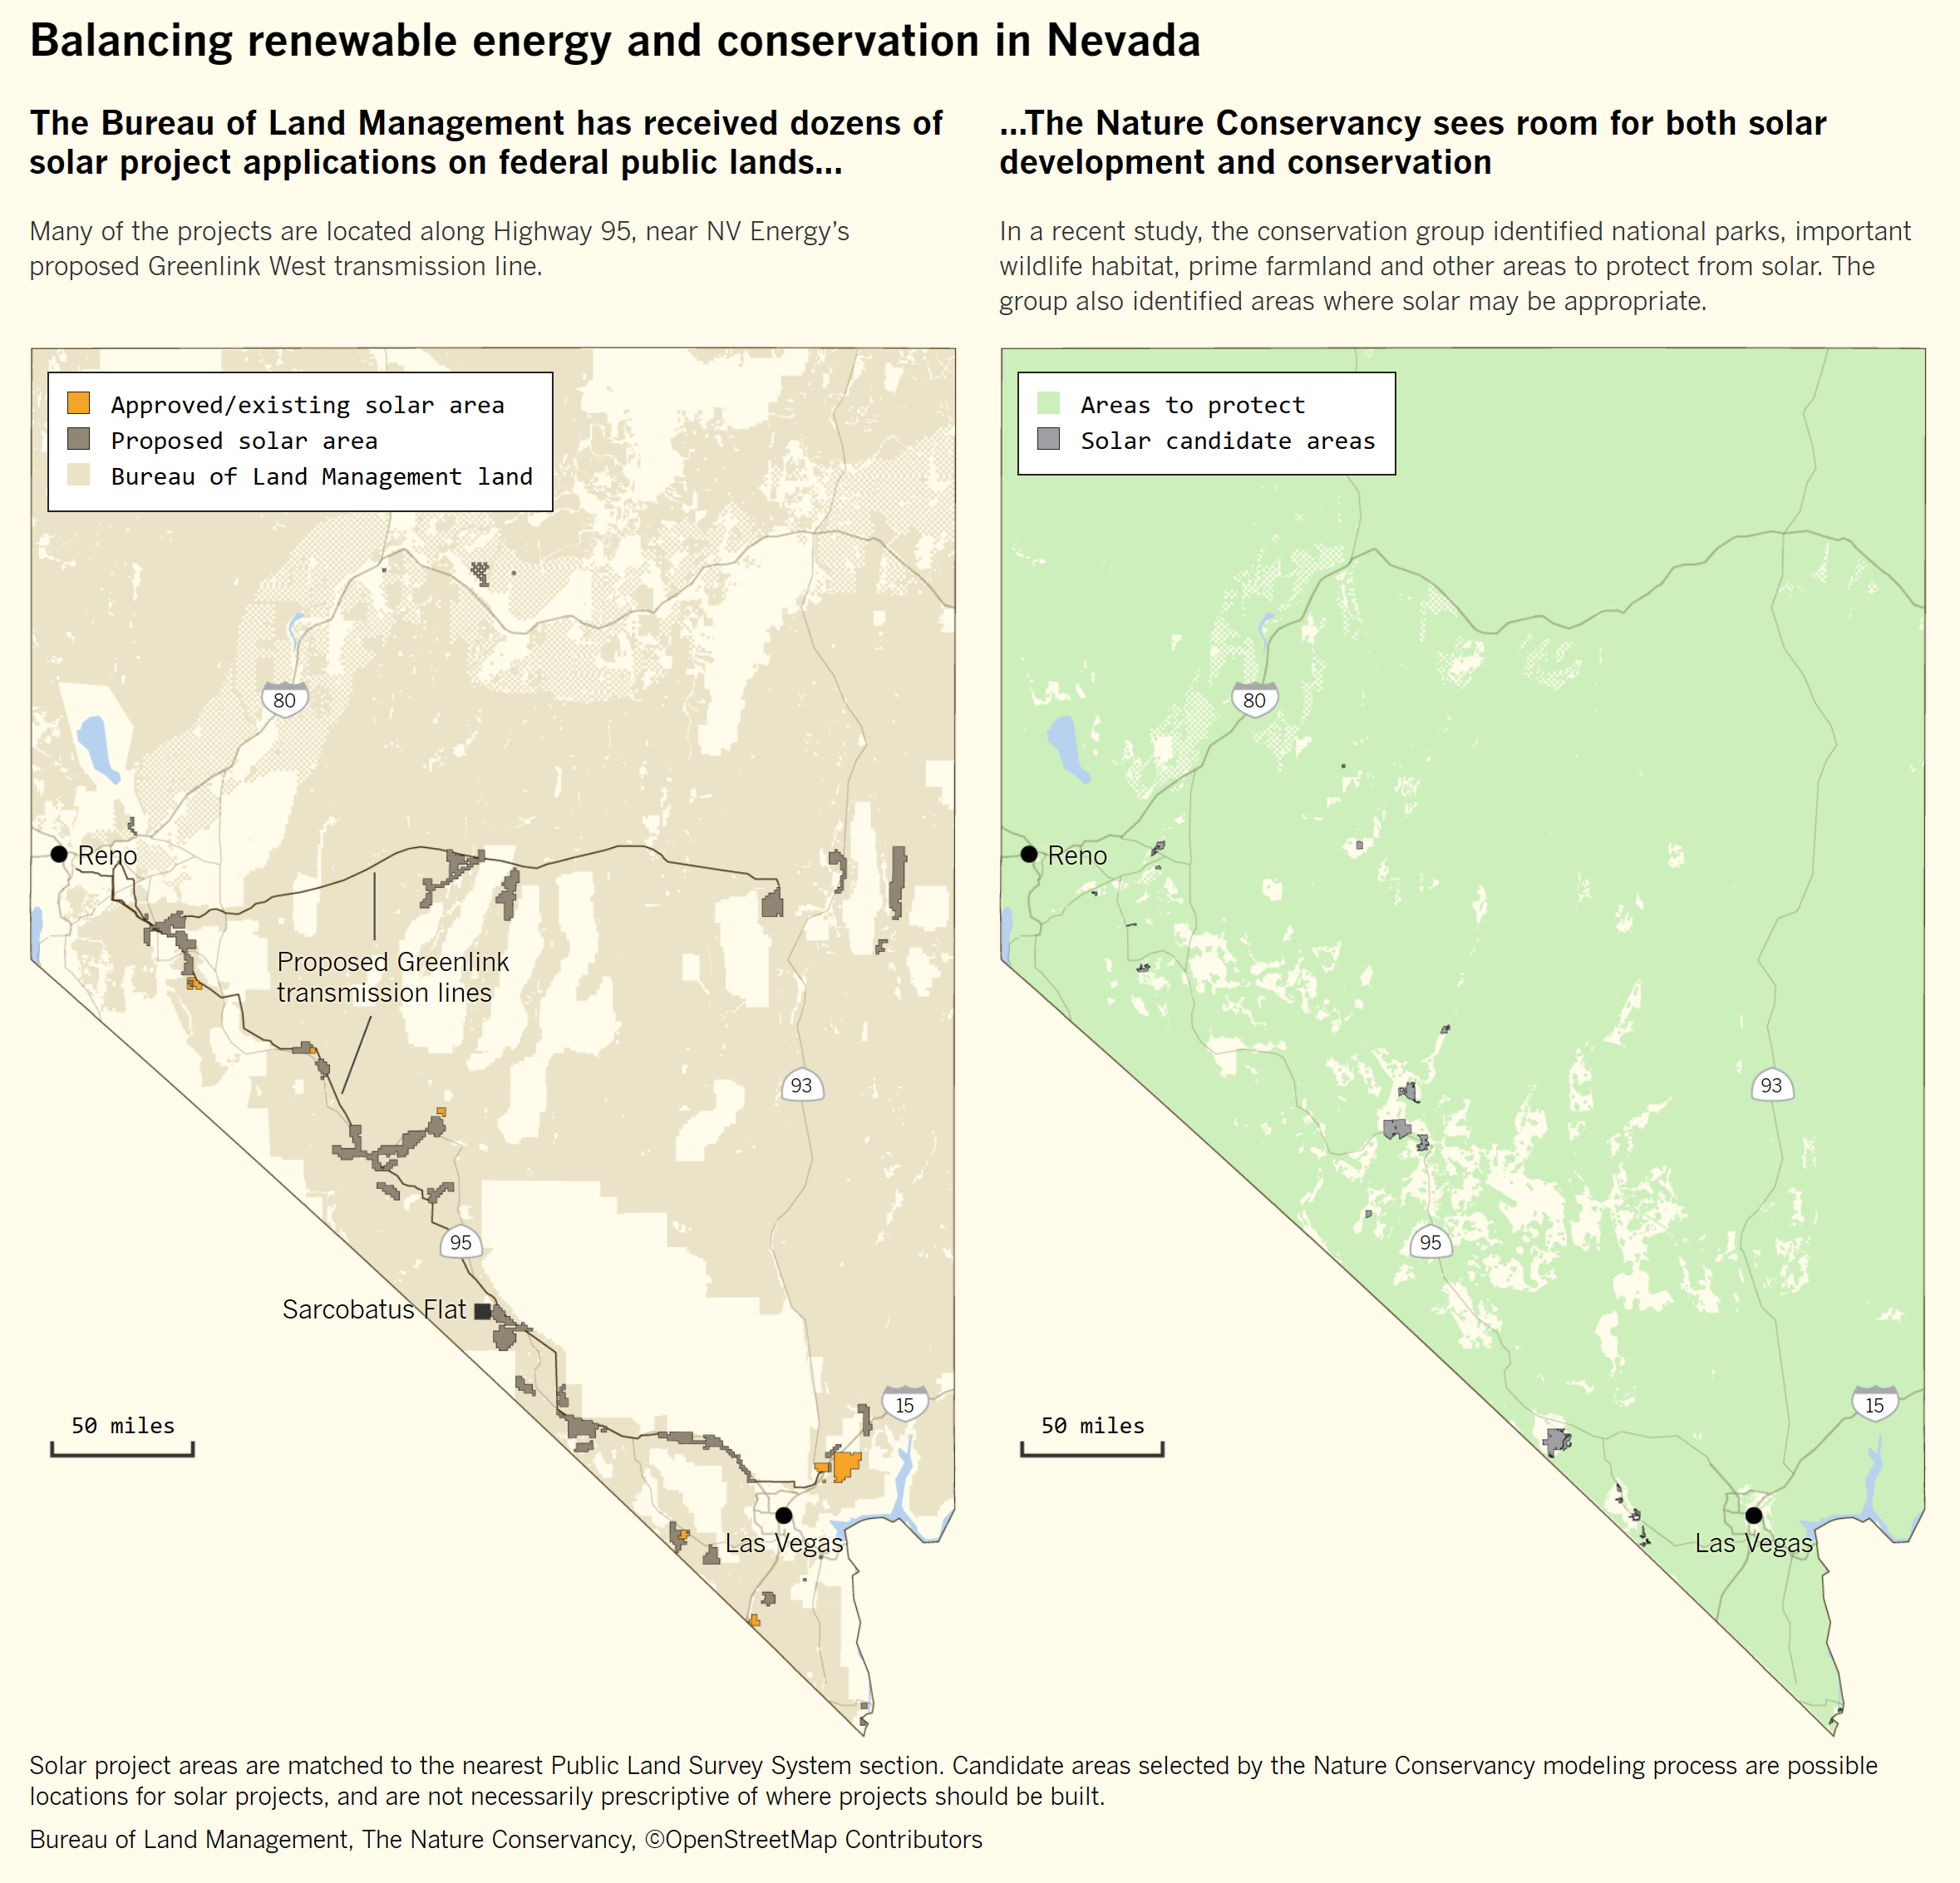 Map showing approved, proposed, and existing solar power plant areas in Nevada (left) and proposed areas to protect from solar development (right). The Bureau of Land Management has received dozens of solar project applications on federal public lands. Many of the projects are located along Highway 95, near NV Energy’s proposed Greenlink West transmission line. The Nature Conservancy sees room for both solar development and conservation. In a recent study, the conservation group identified national parks, important wildlife habitat, prime farmland and other areas to protect from solar. The group also identified areas where solar may be appropriate. Data: Bureau of Land Management / The Nature Conservancy / ©OpenStreetMap Contributors. Graphic: Los Angeles Times